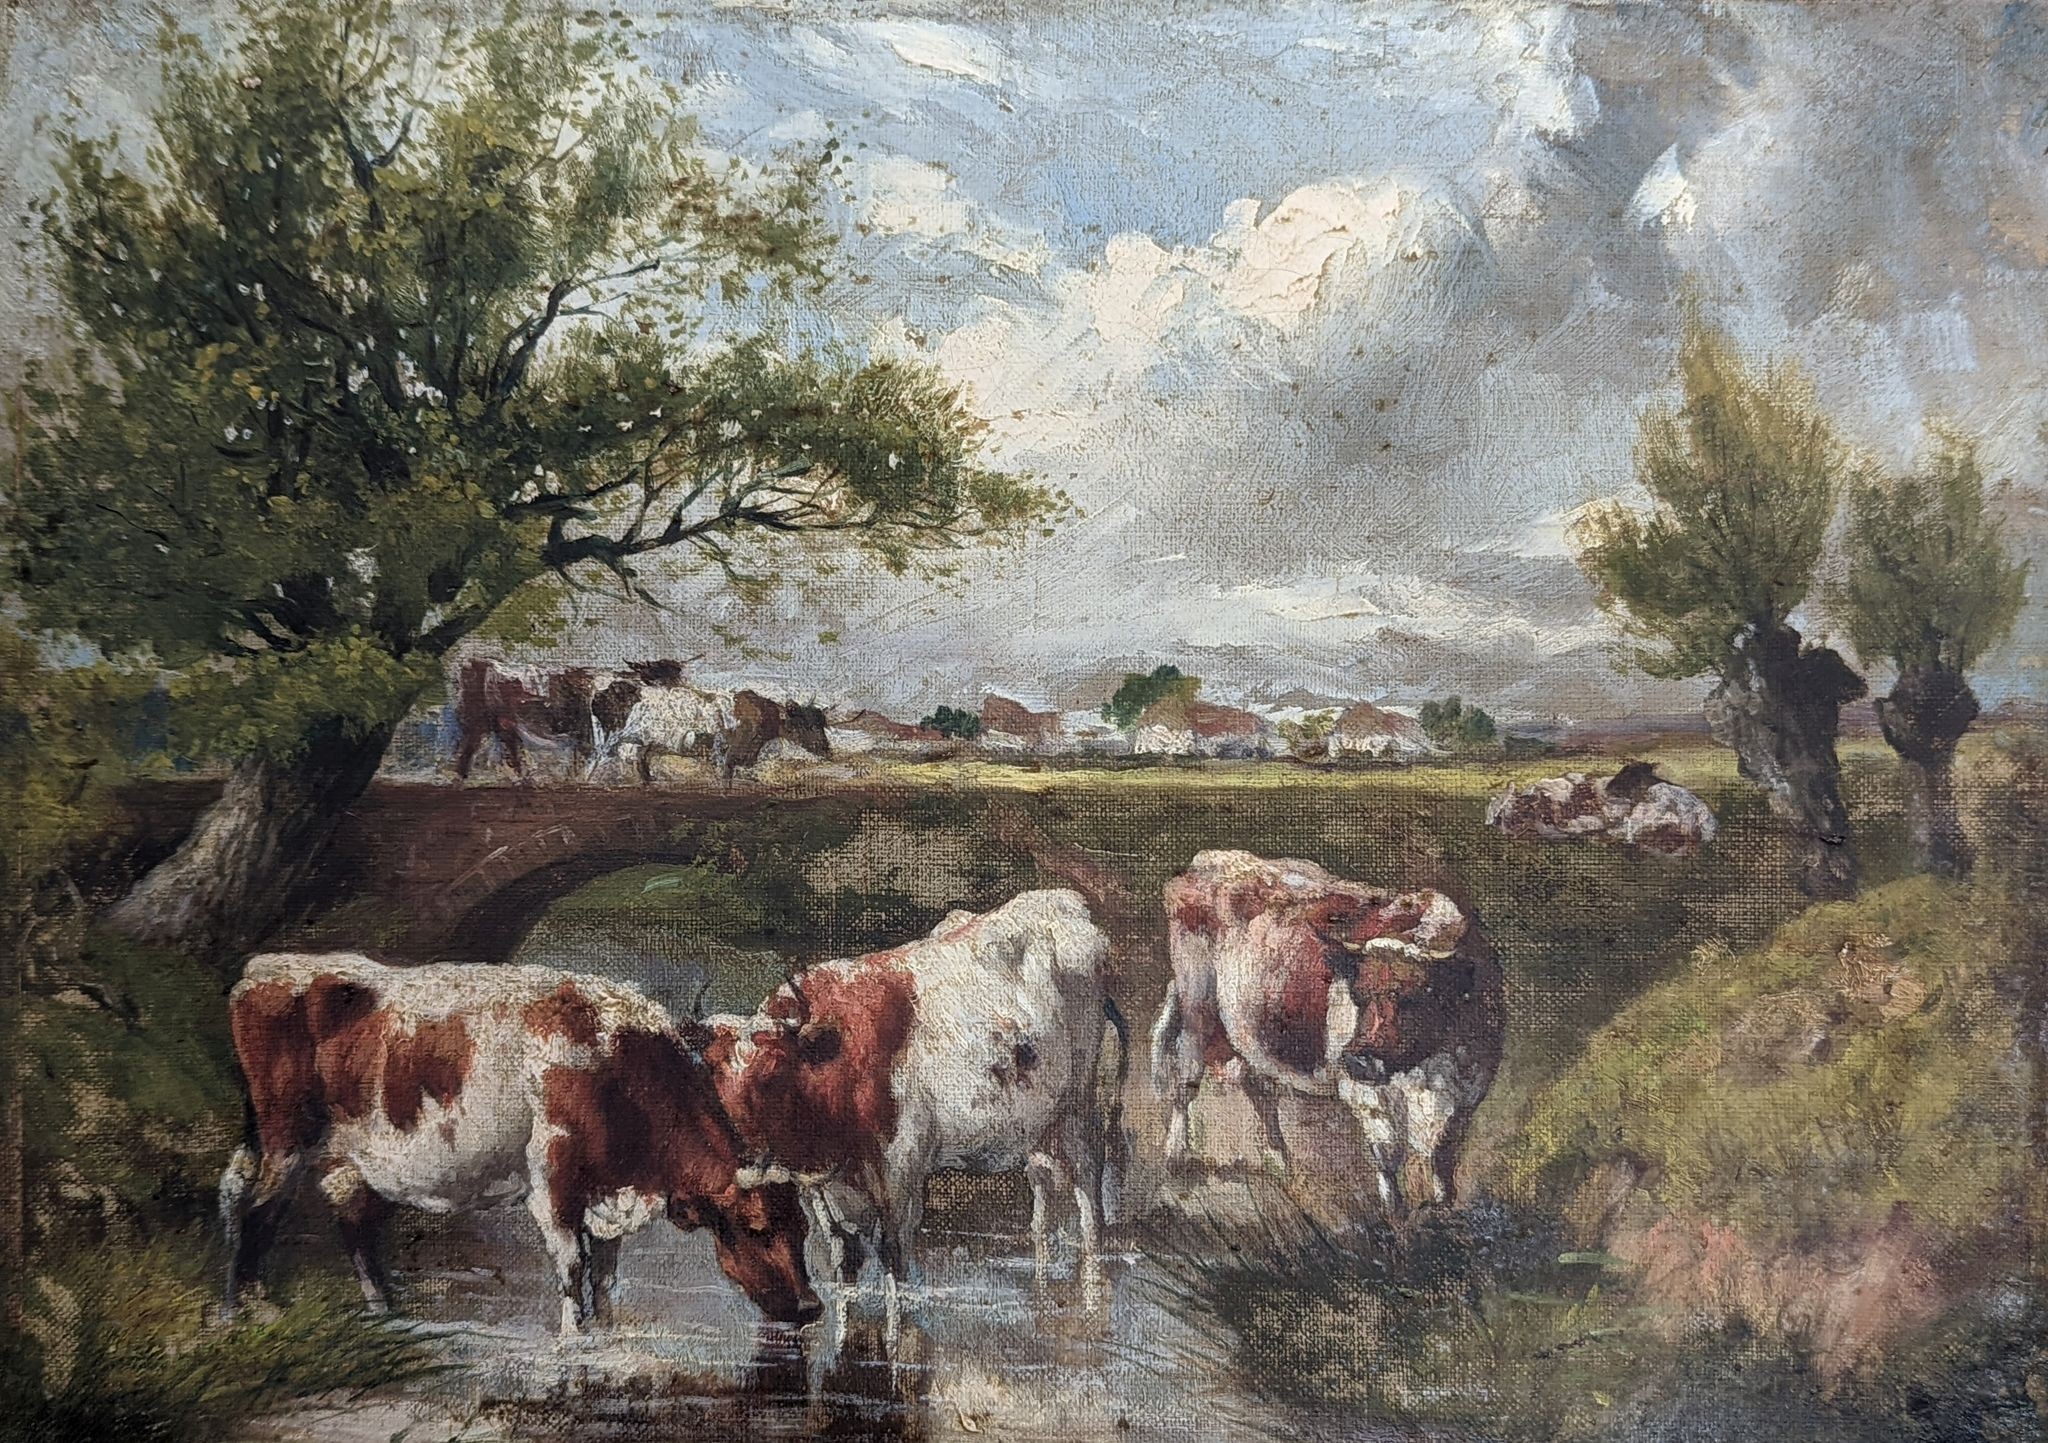 After Clarkson Stanfield, oil on canvas, Cattle watering, 25 x 36cm, unframed